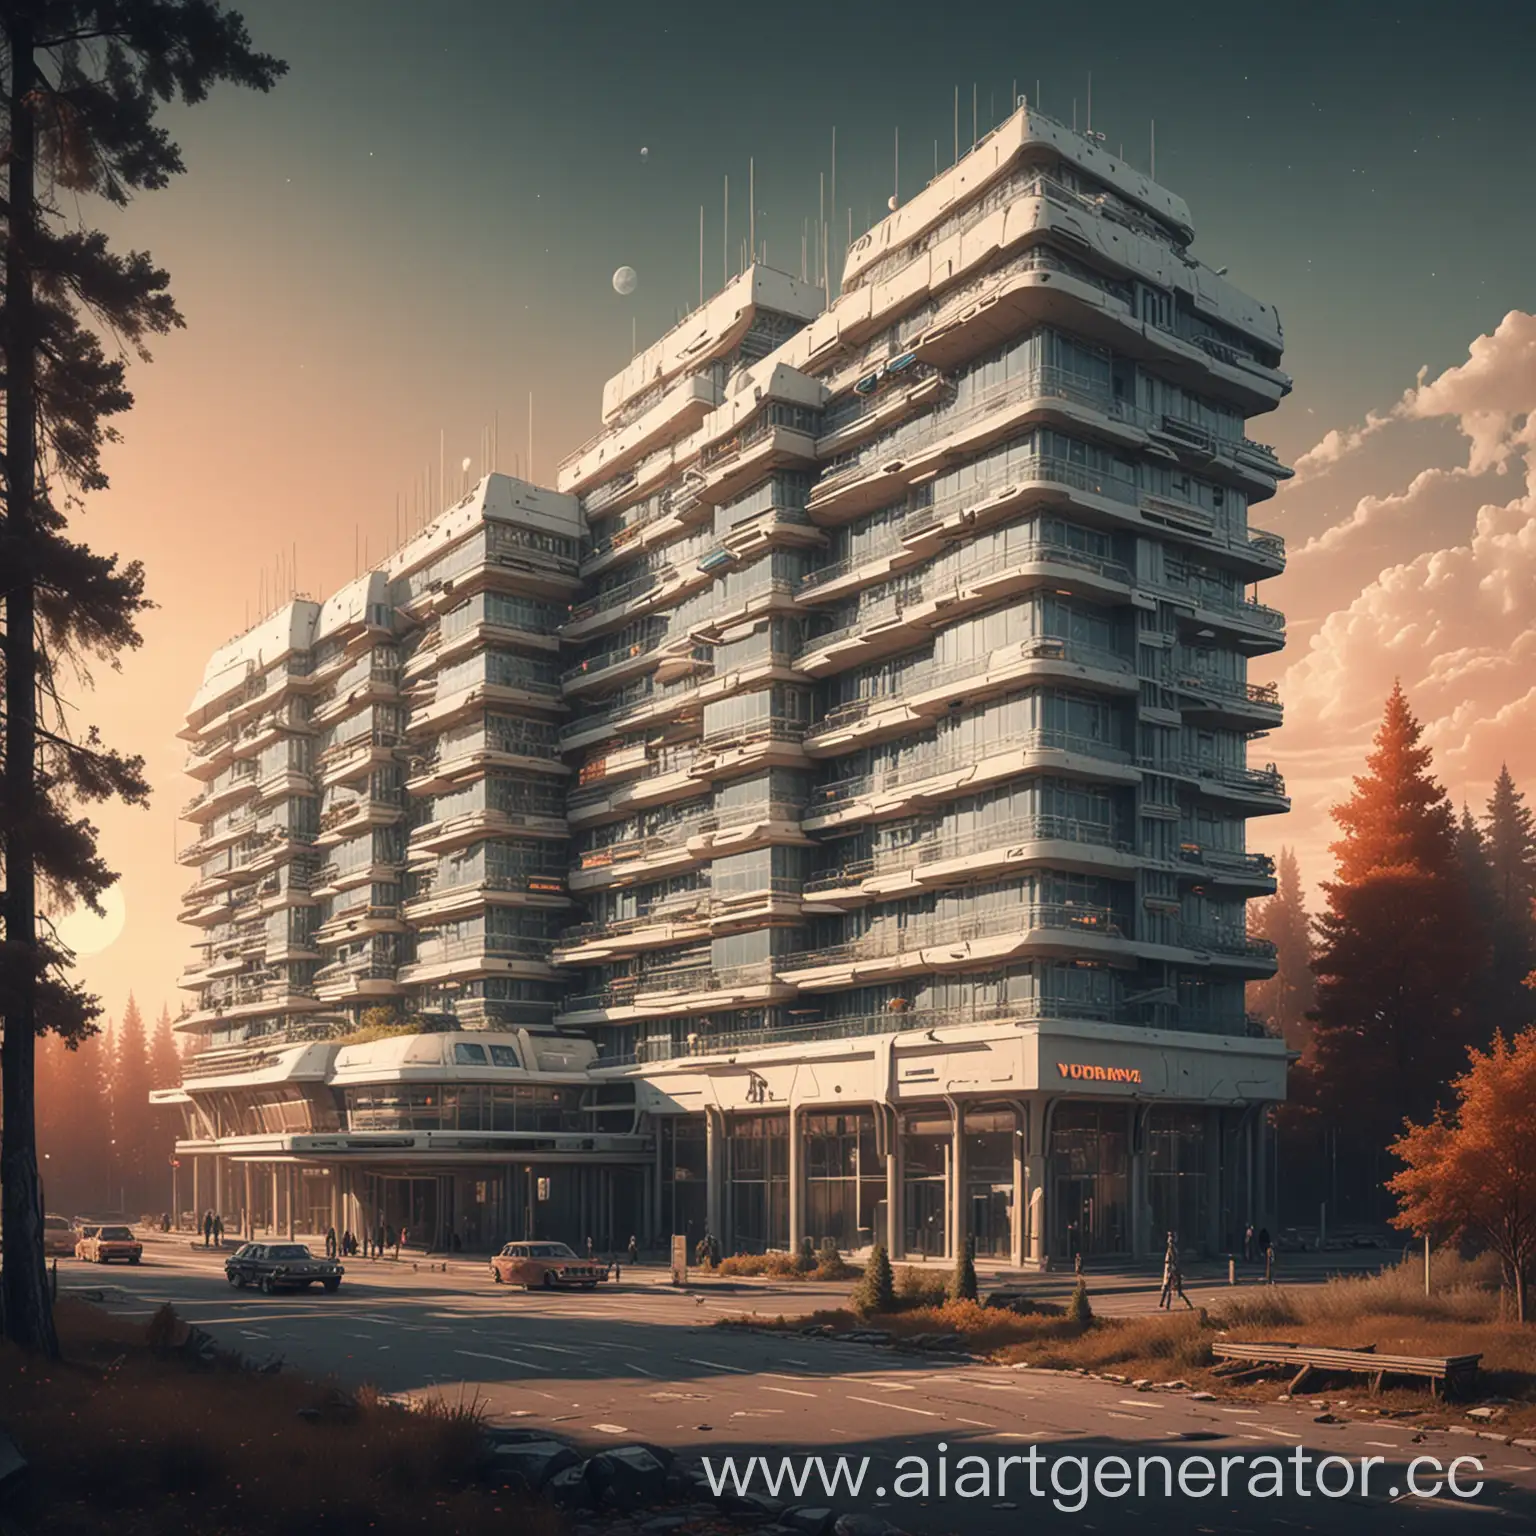 Retro-Futurism-Hotel-on-VDNH-Grounds-Visionary-Architecture-in-a-Nostalgic-Setting